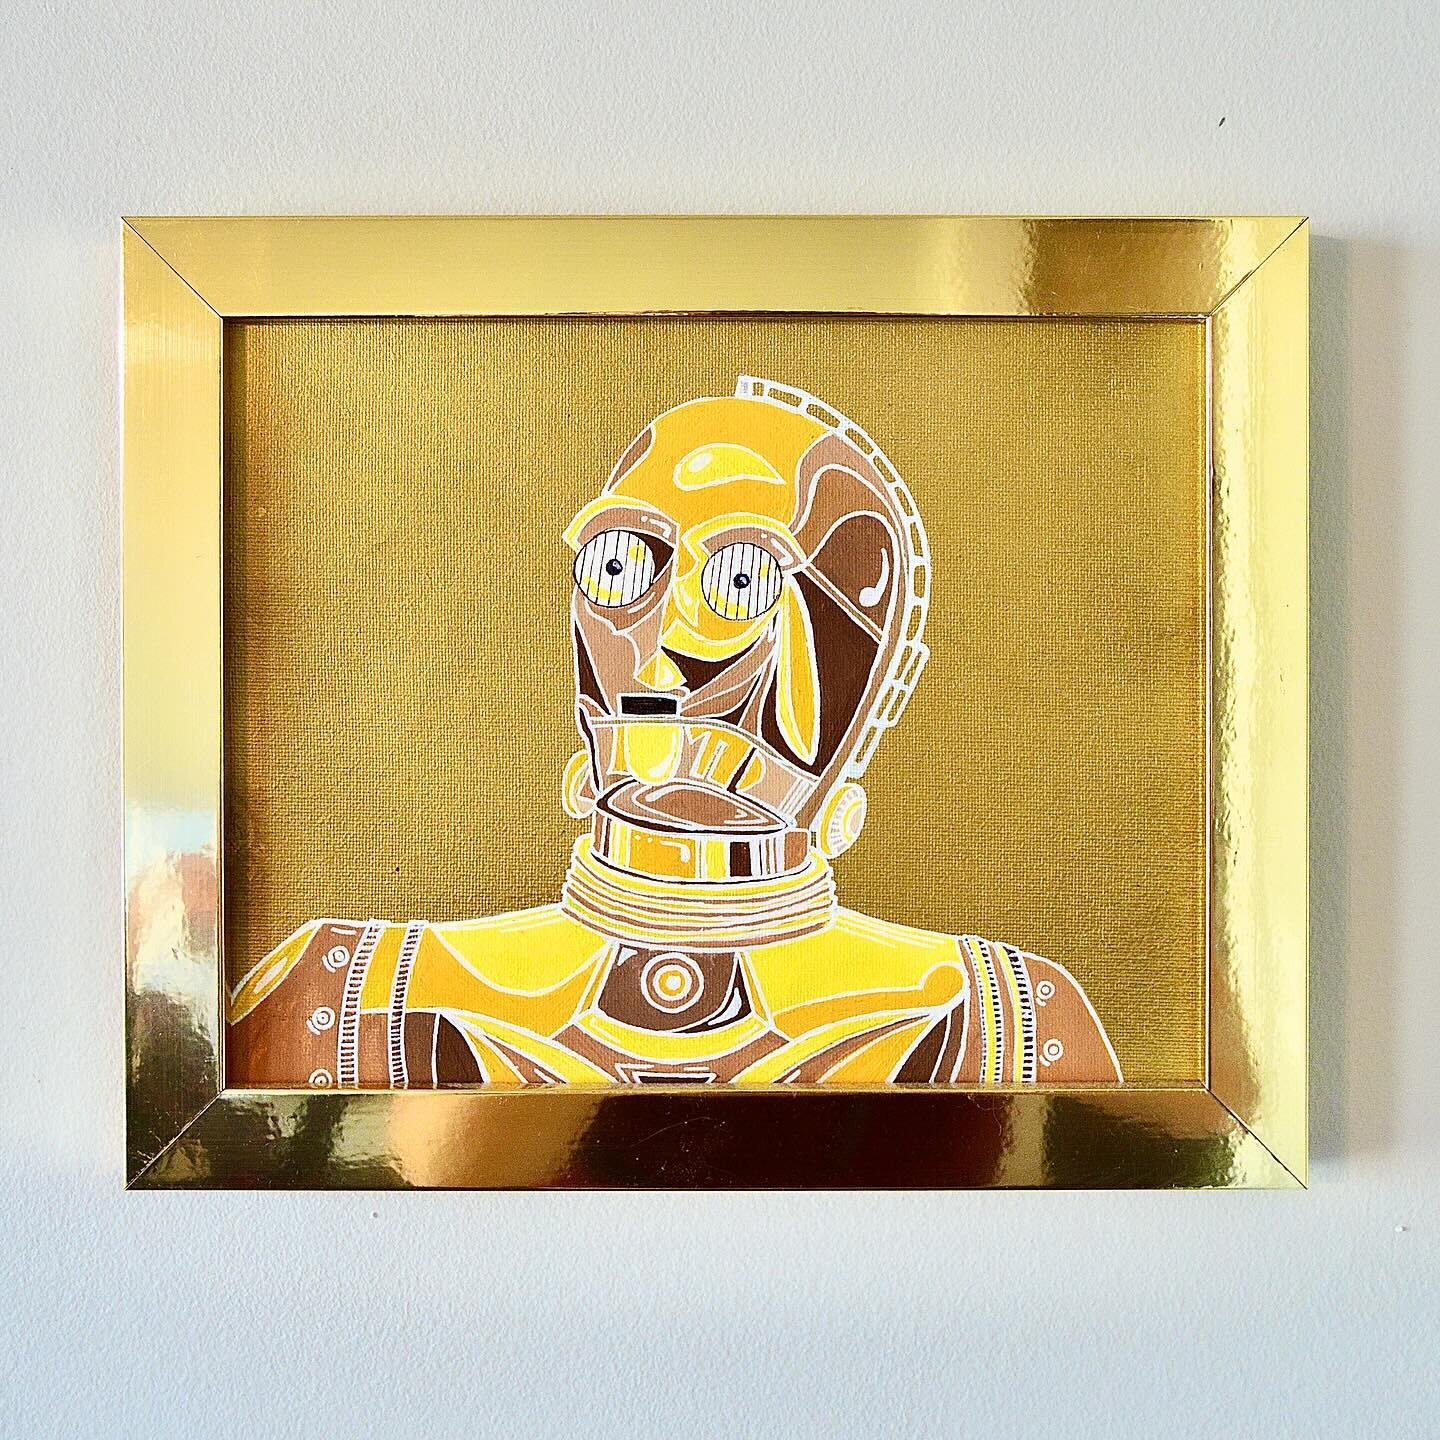 FOR SALE 💫 &ldquo;C-3PO&rdquo;

8 x 10, Acrylic on Canvas
Piece comes framed 
$150

Comment, DM me , or purchase straight though my website  www.lesliewade.com 💓💓
 
Fun fact! C-3PO is one of the only characters to appear in every single one of the